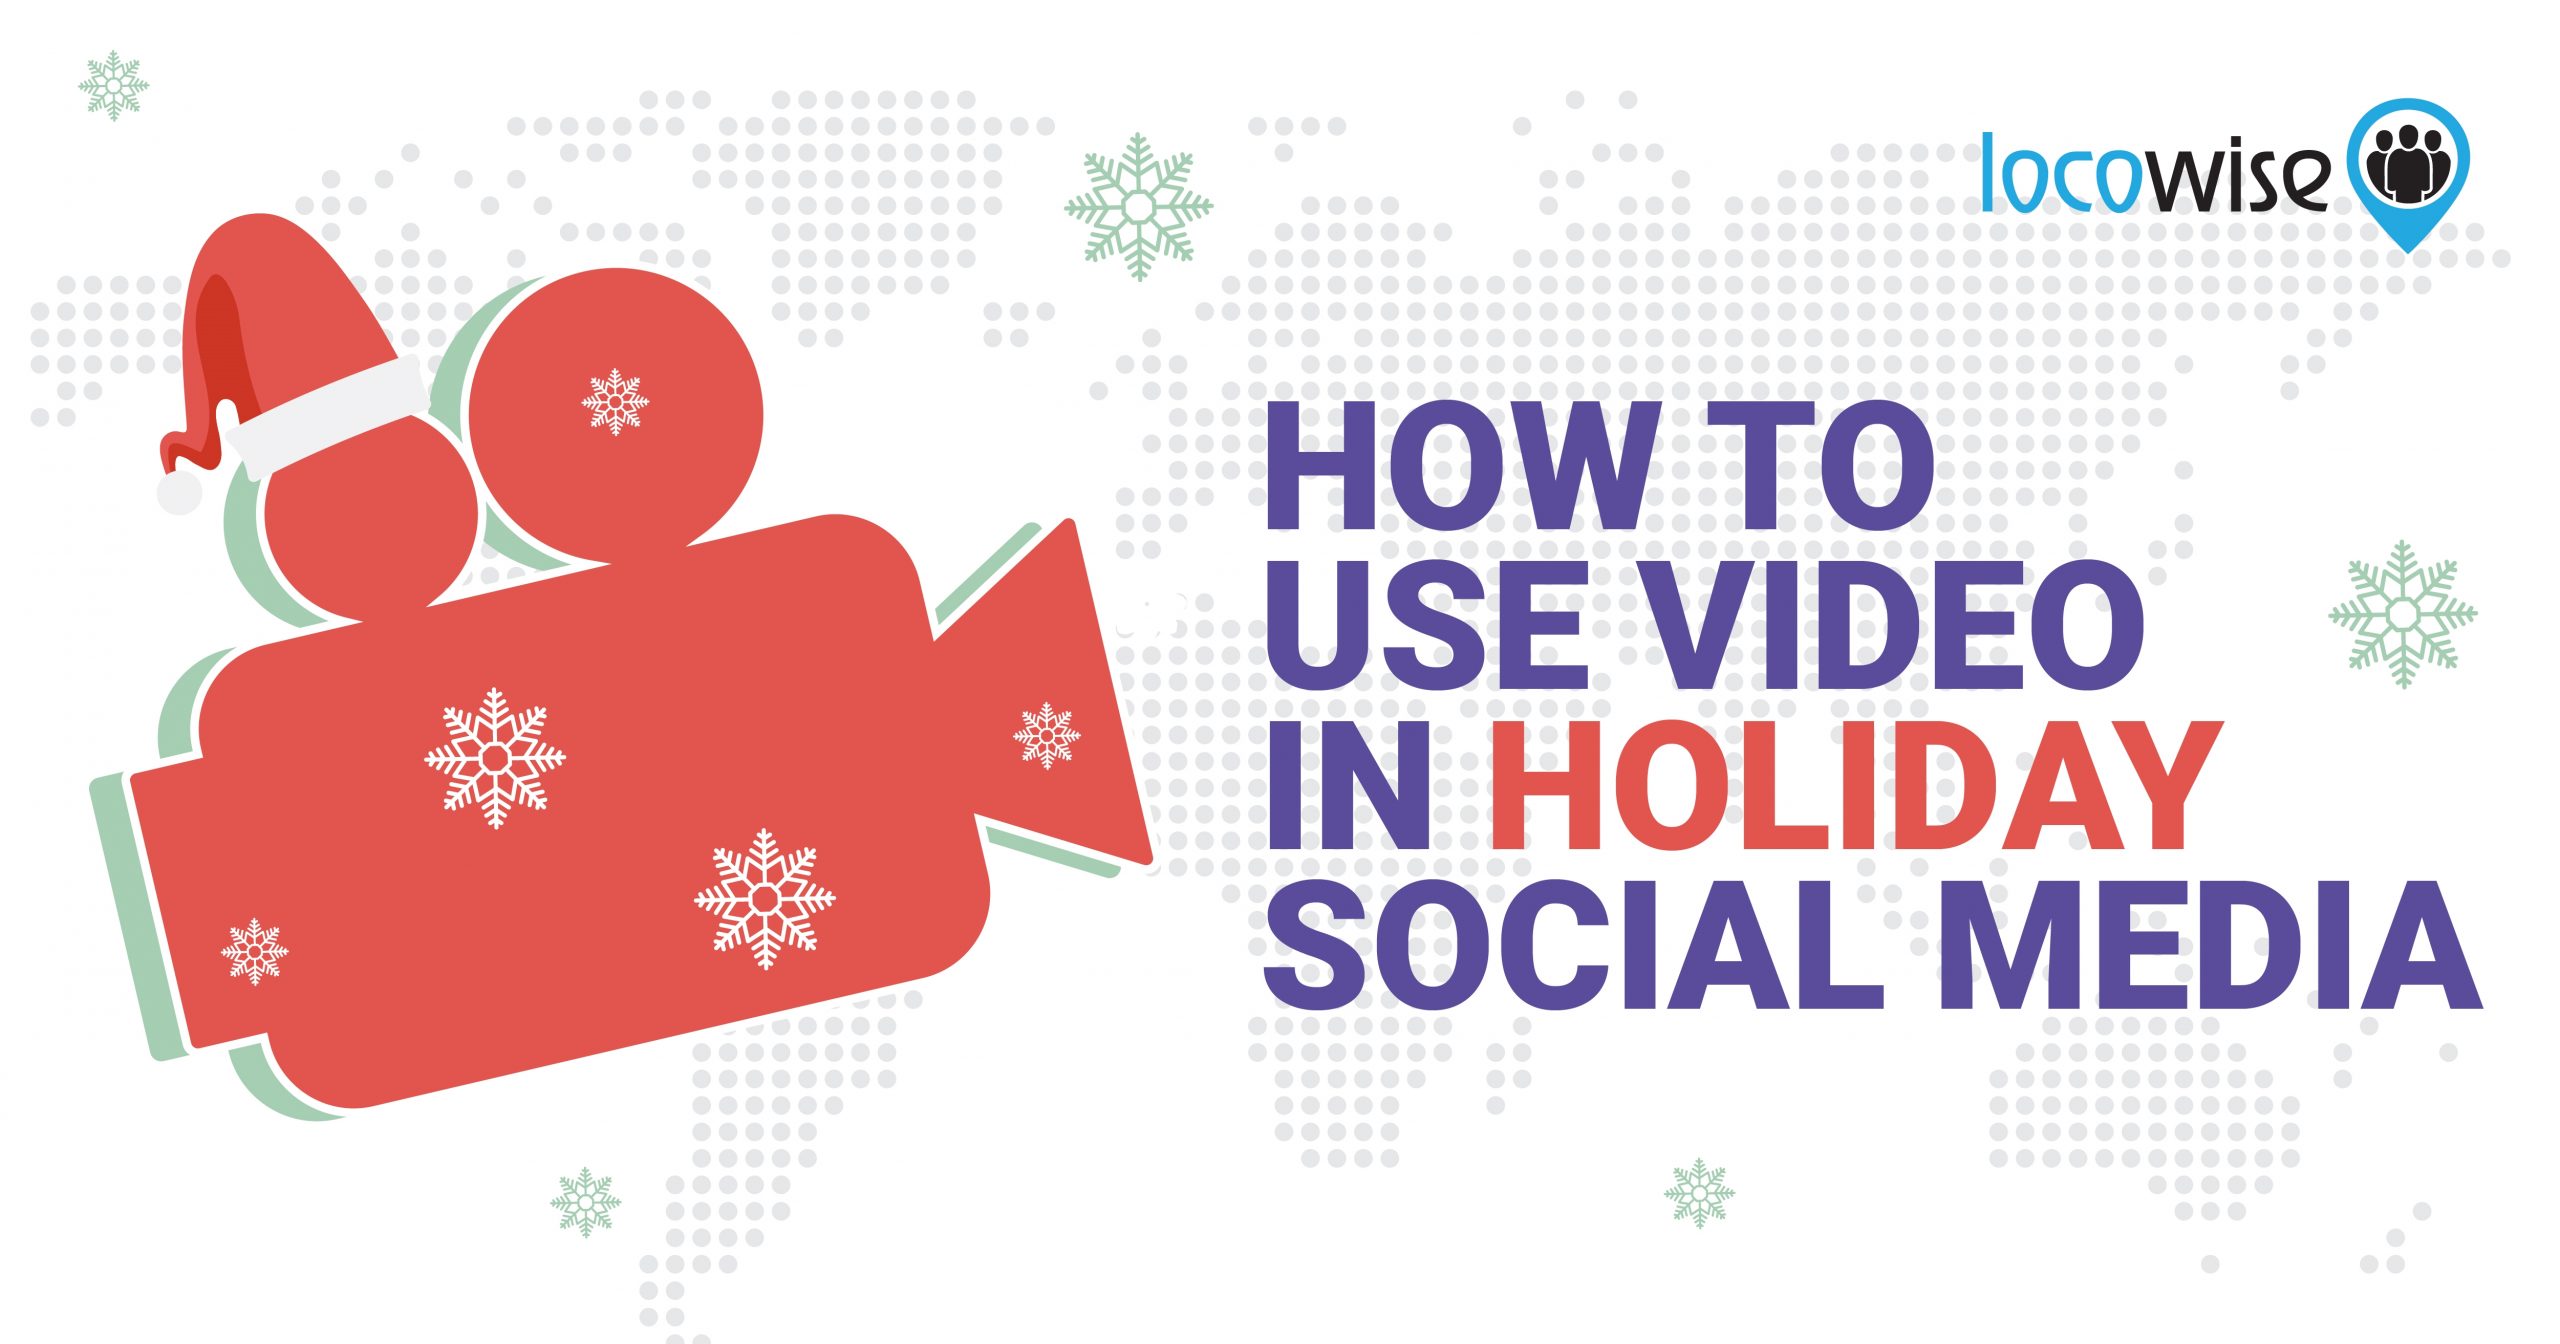 How to Use Video in Holiday Social Media